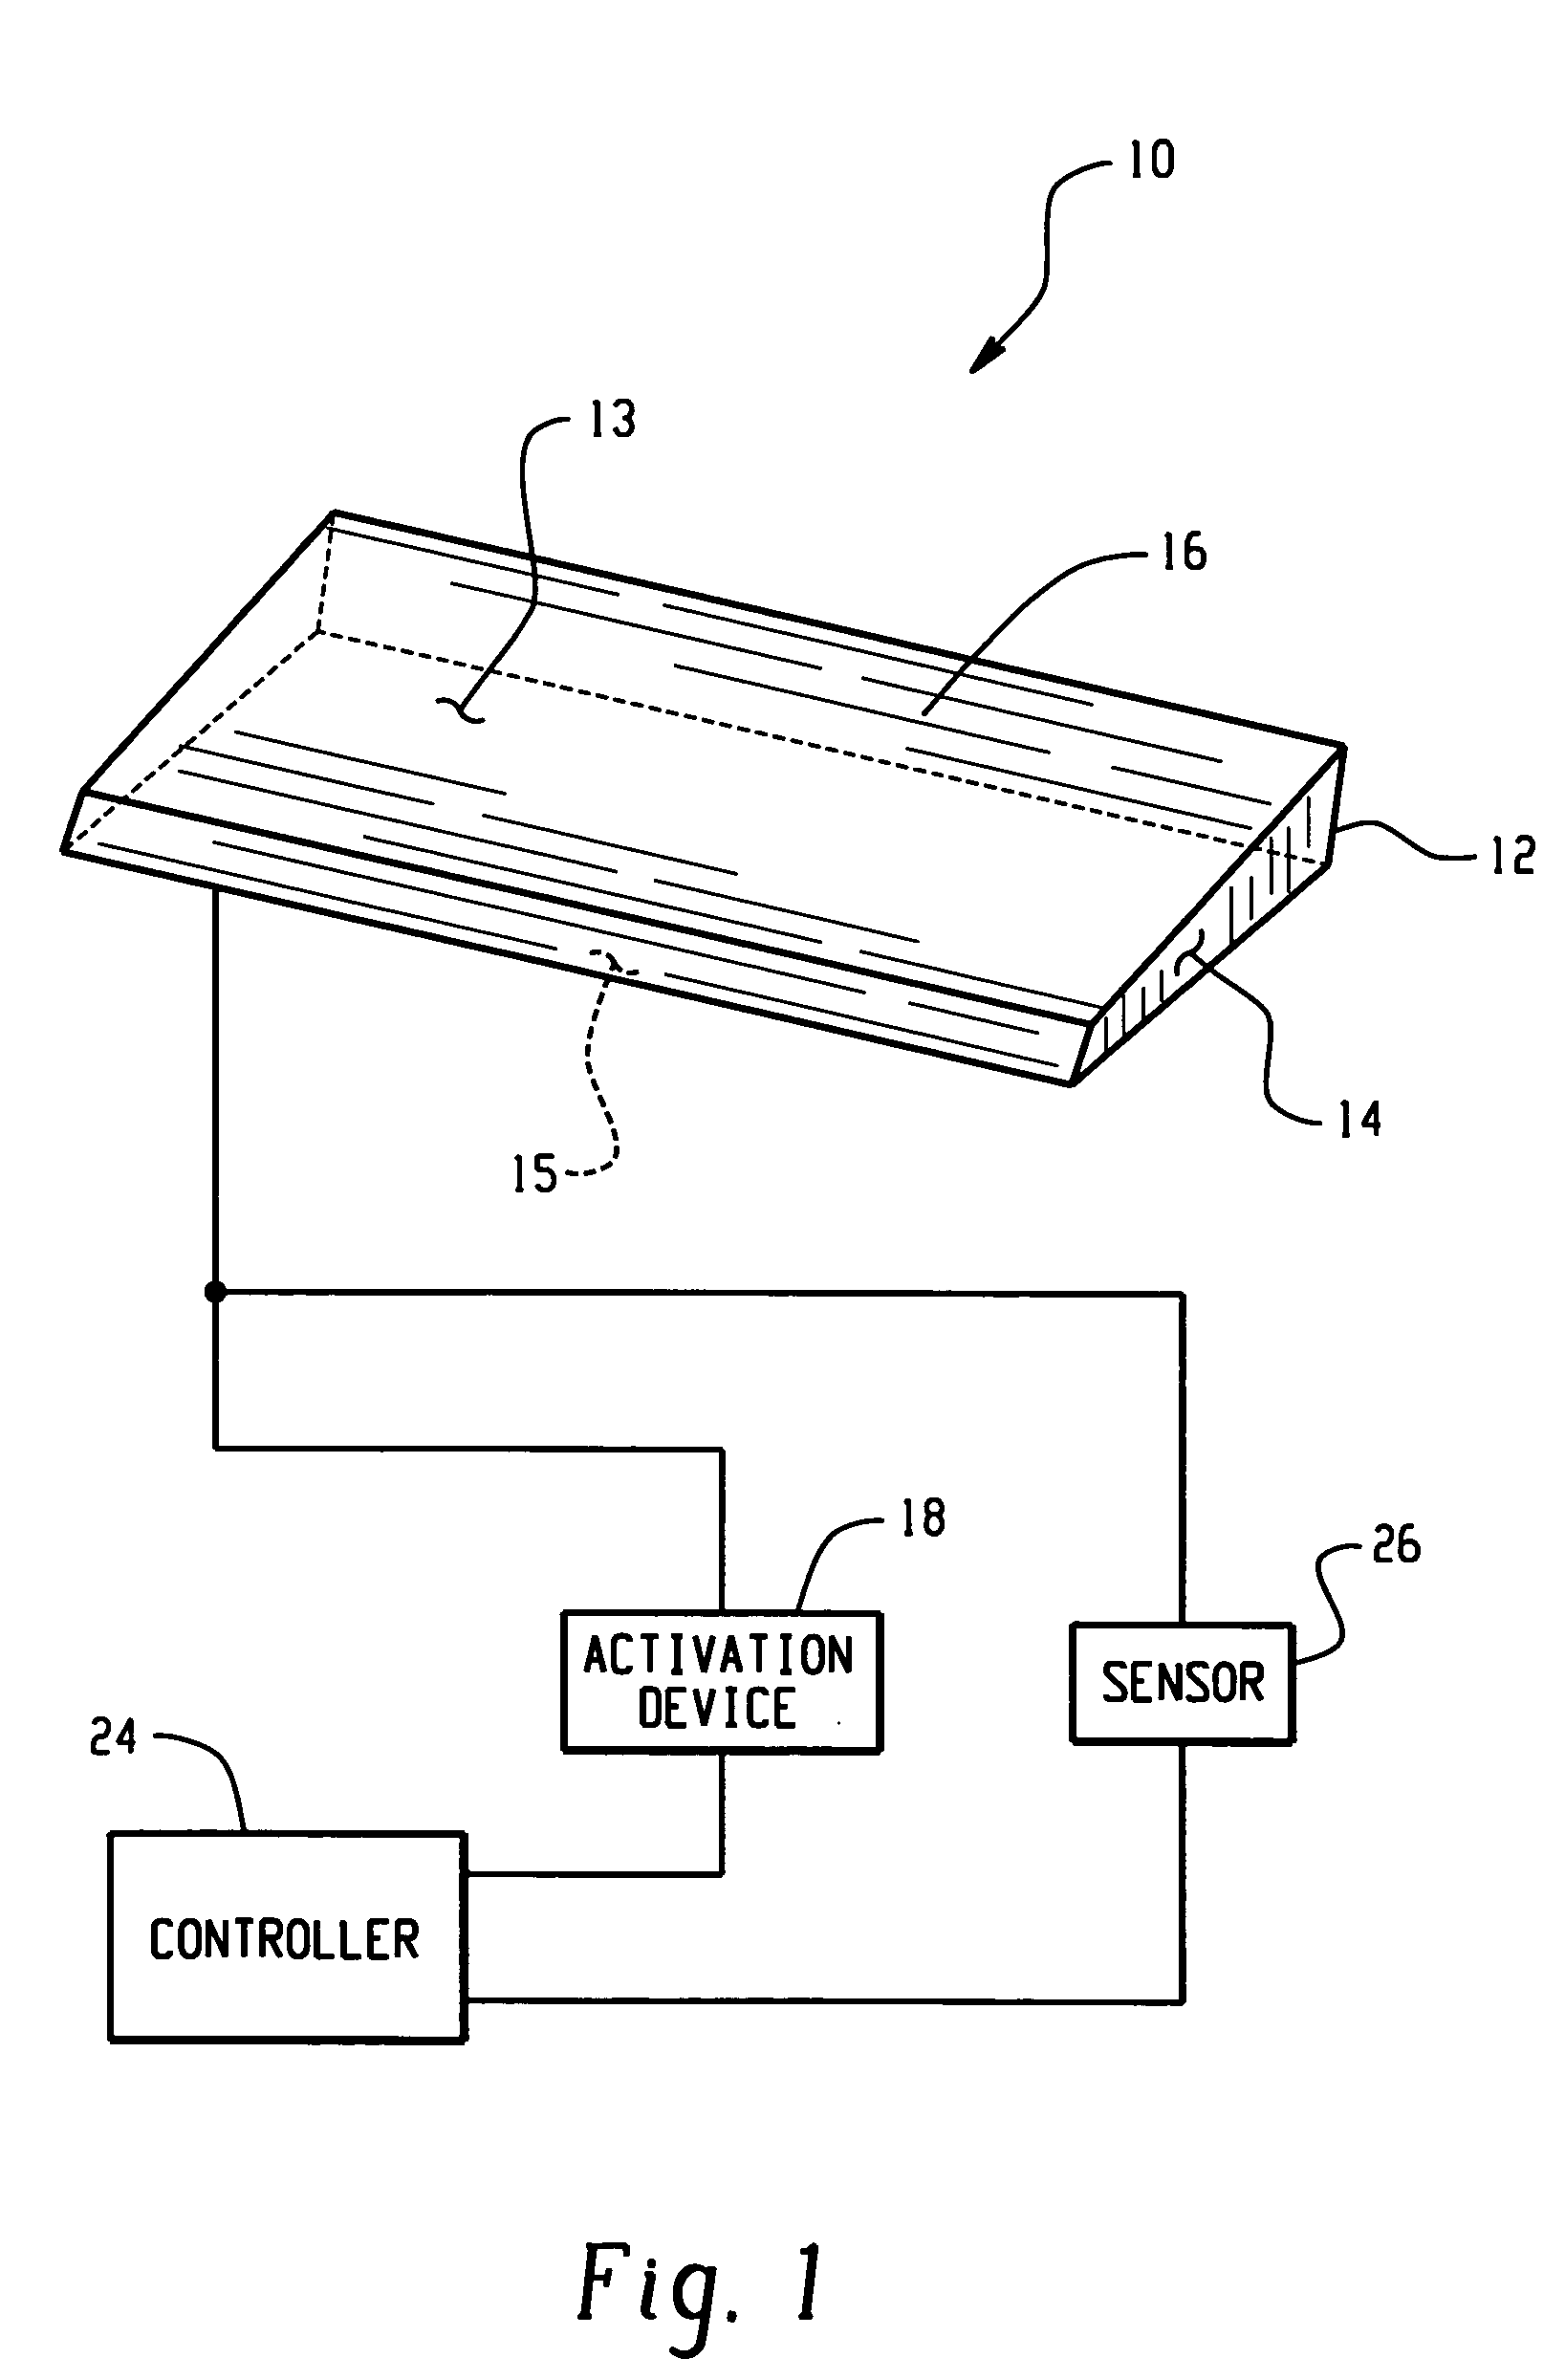 Airflow control devices based on active materials